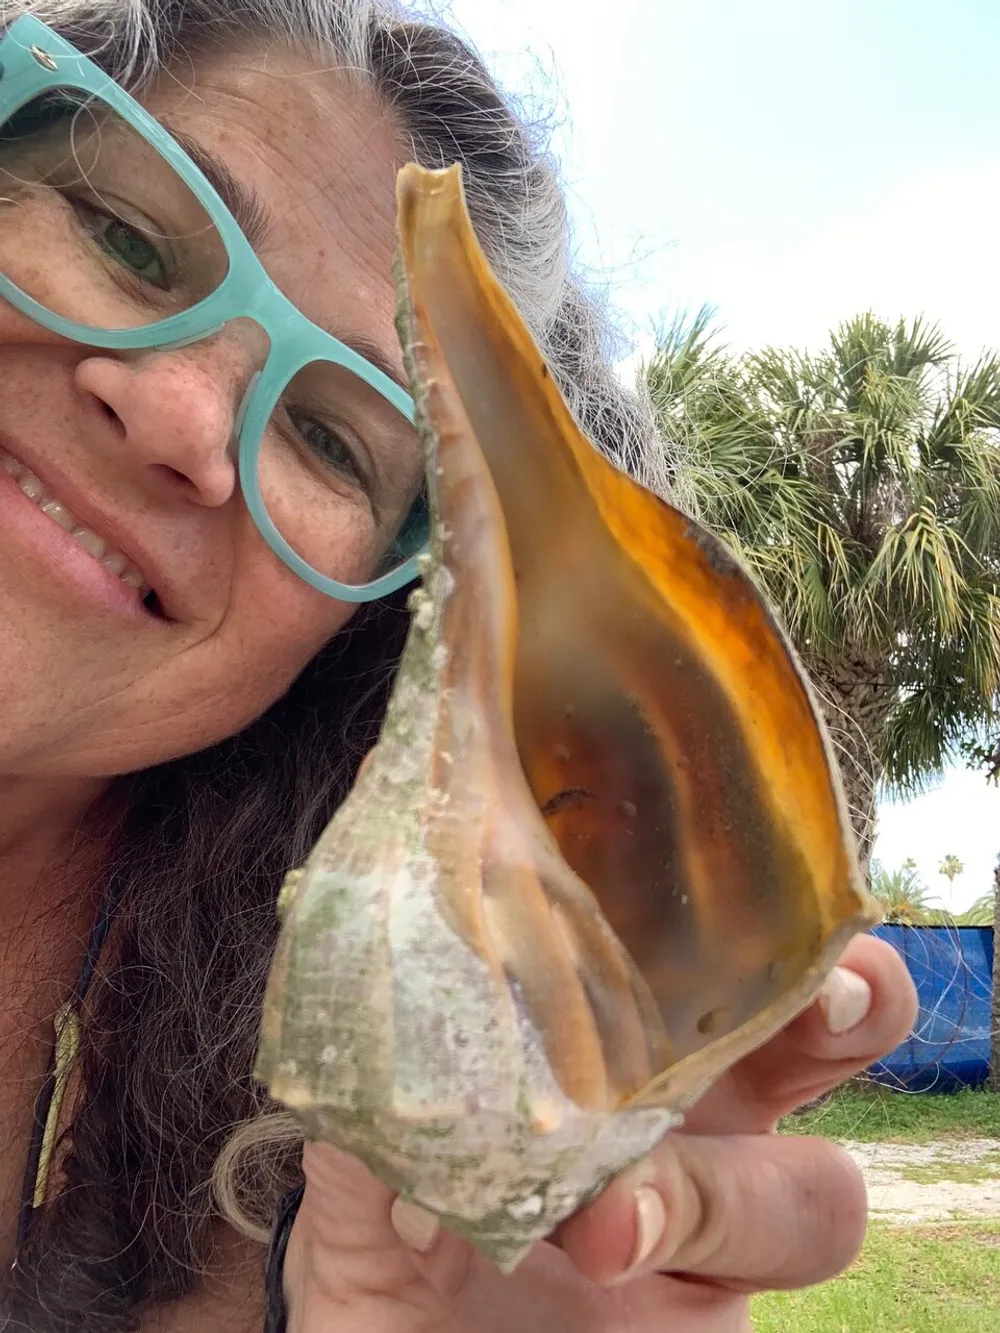 A person with turquoise glasses is holding up a large shell to the camera with palm trees in the background